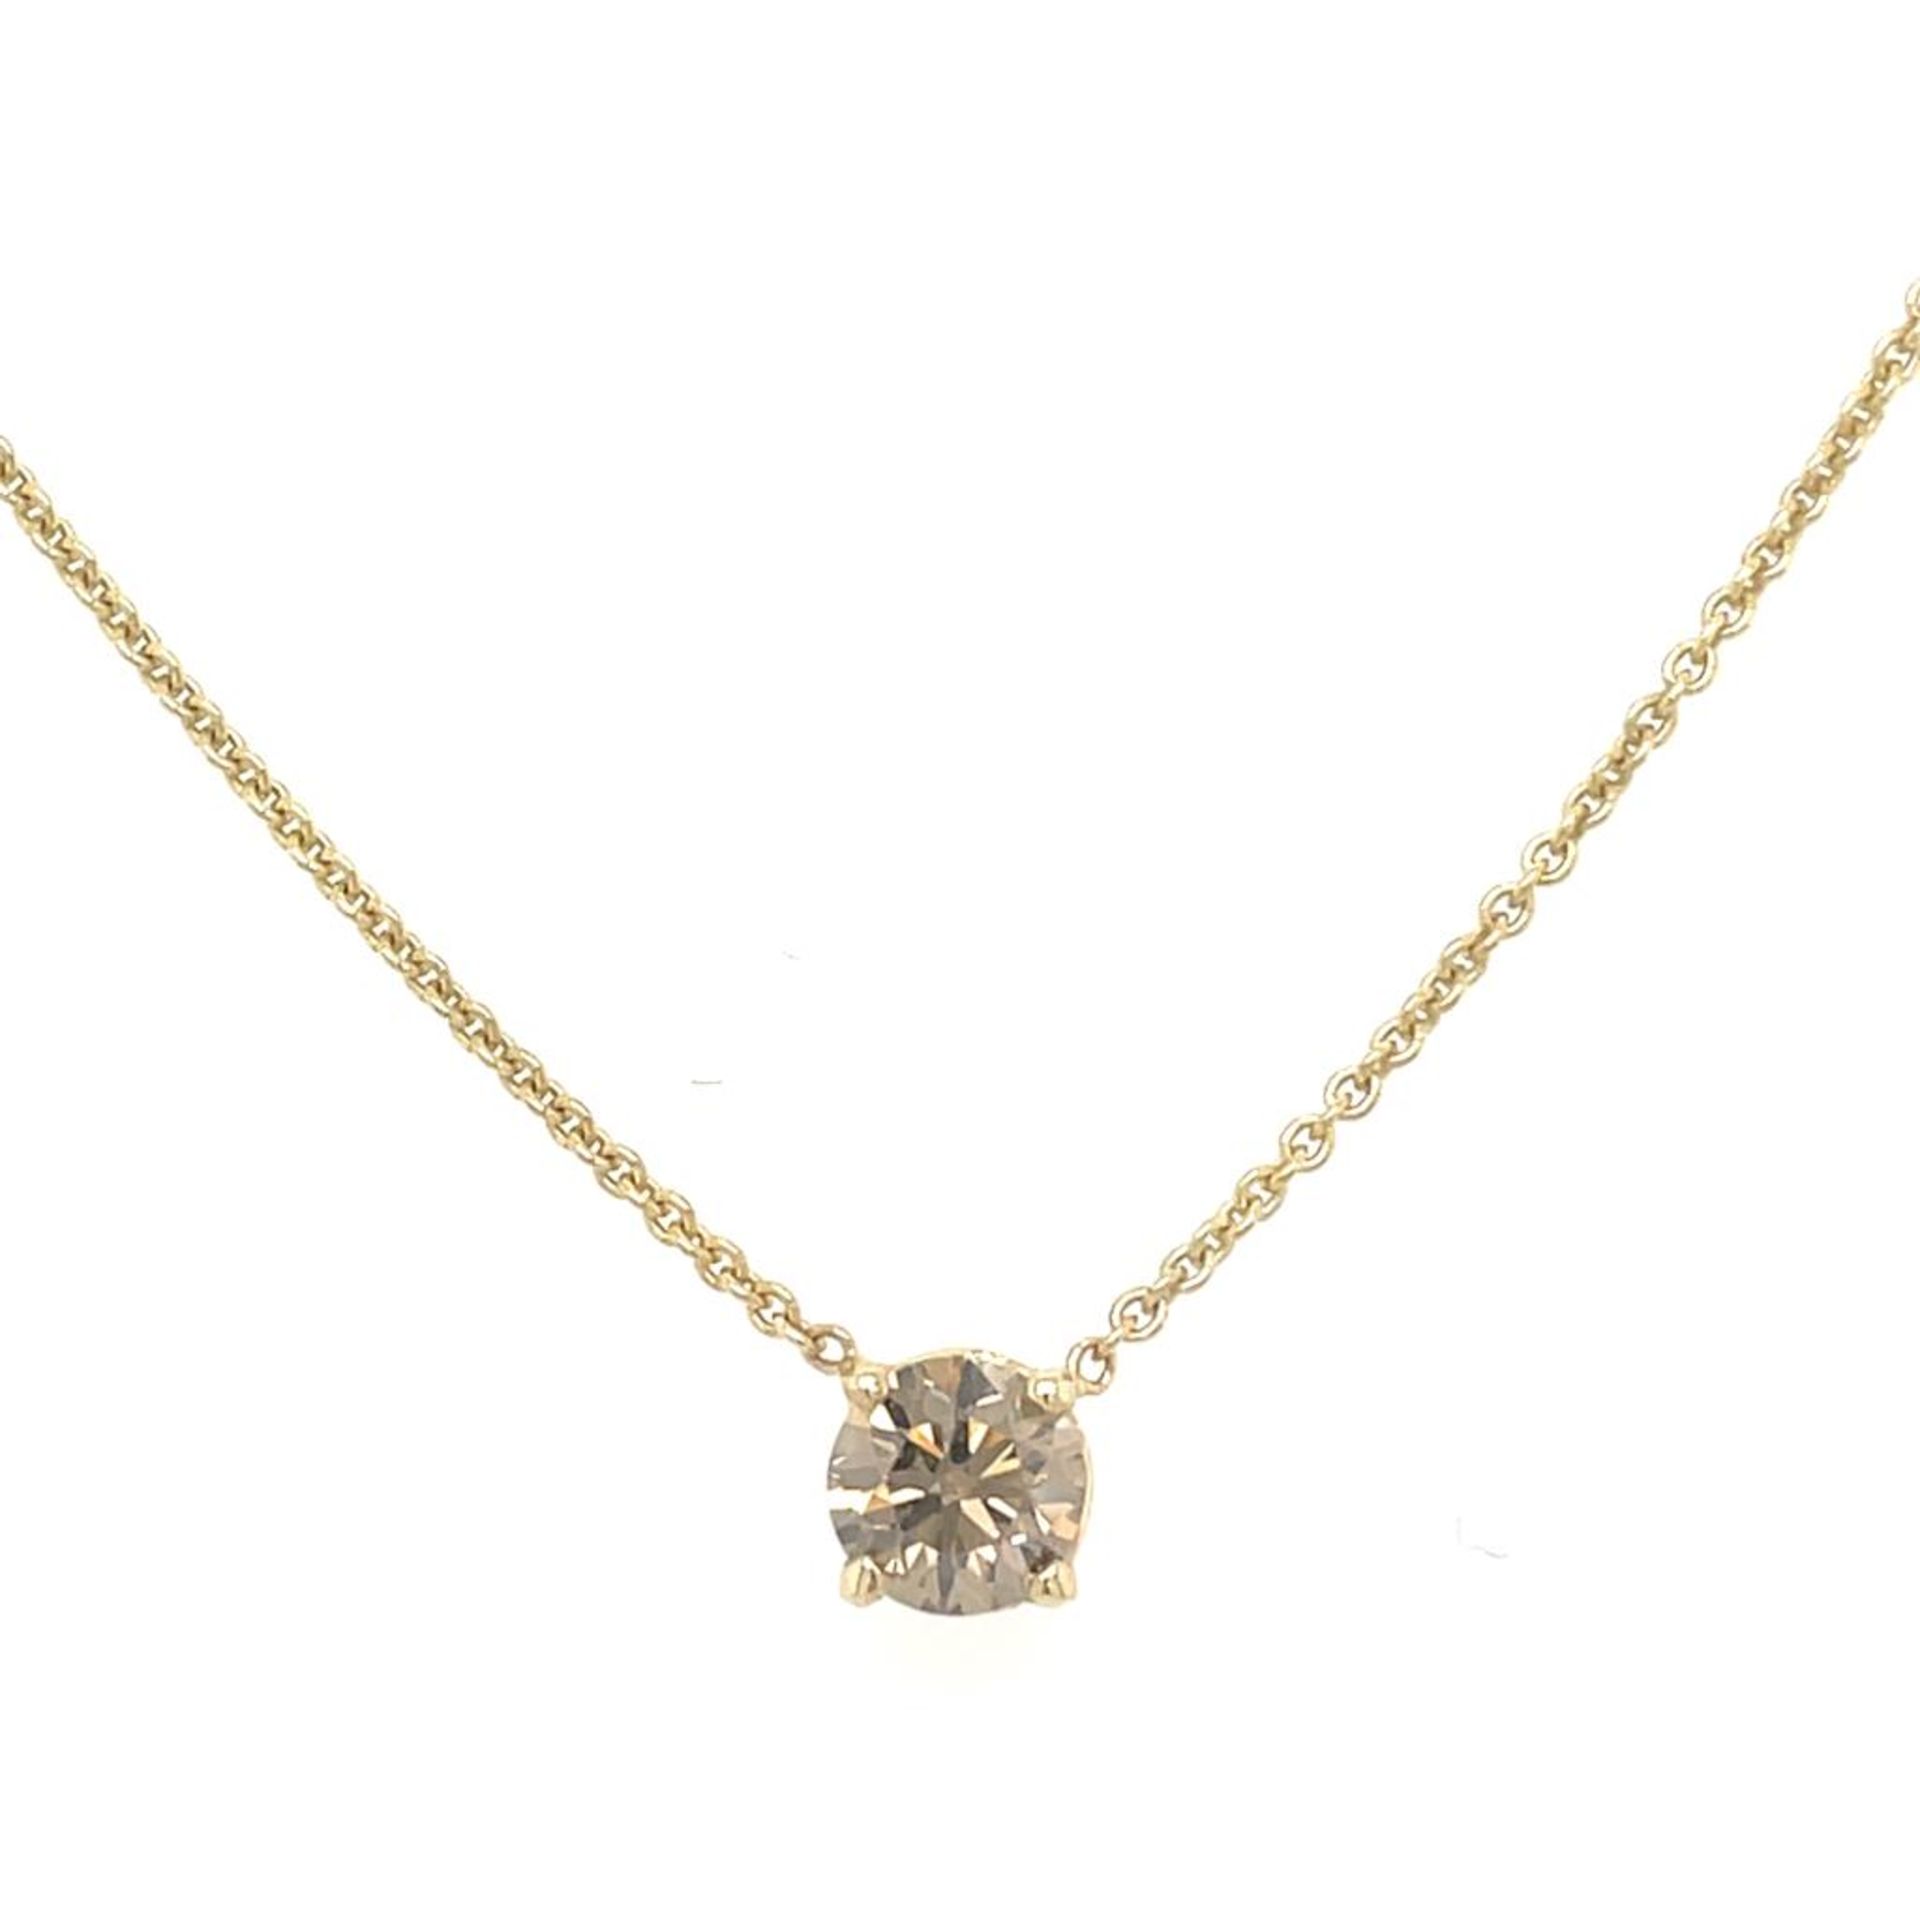 14K YELLOW GOLD 1.97G DIAMOND NECKLACE 0.56 CT NATURAL FANCY DEEP BROWN/VS1 CERTIFICATION AIG -